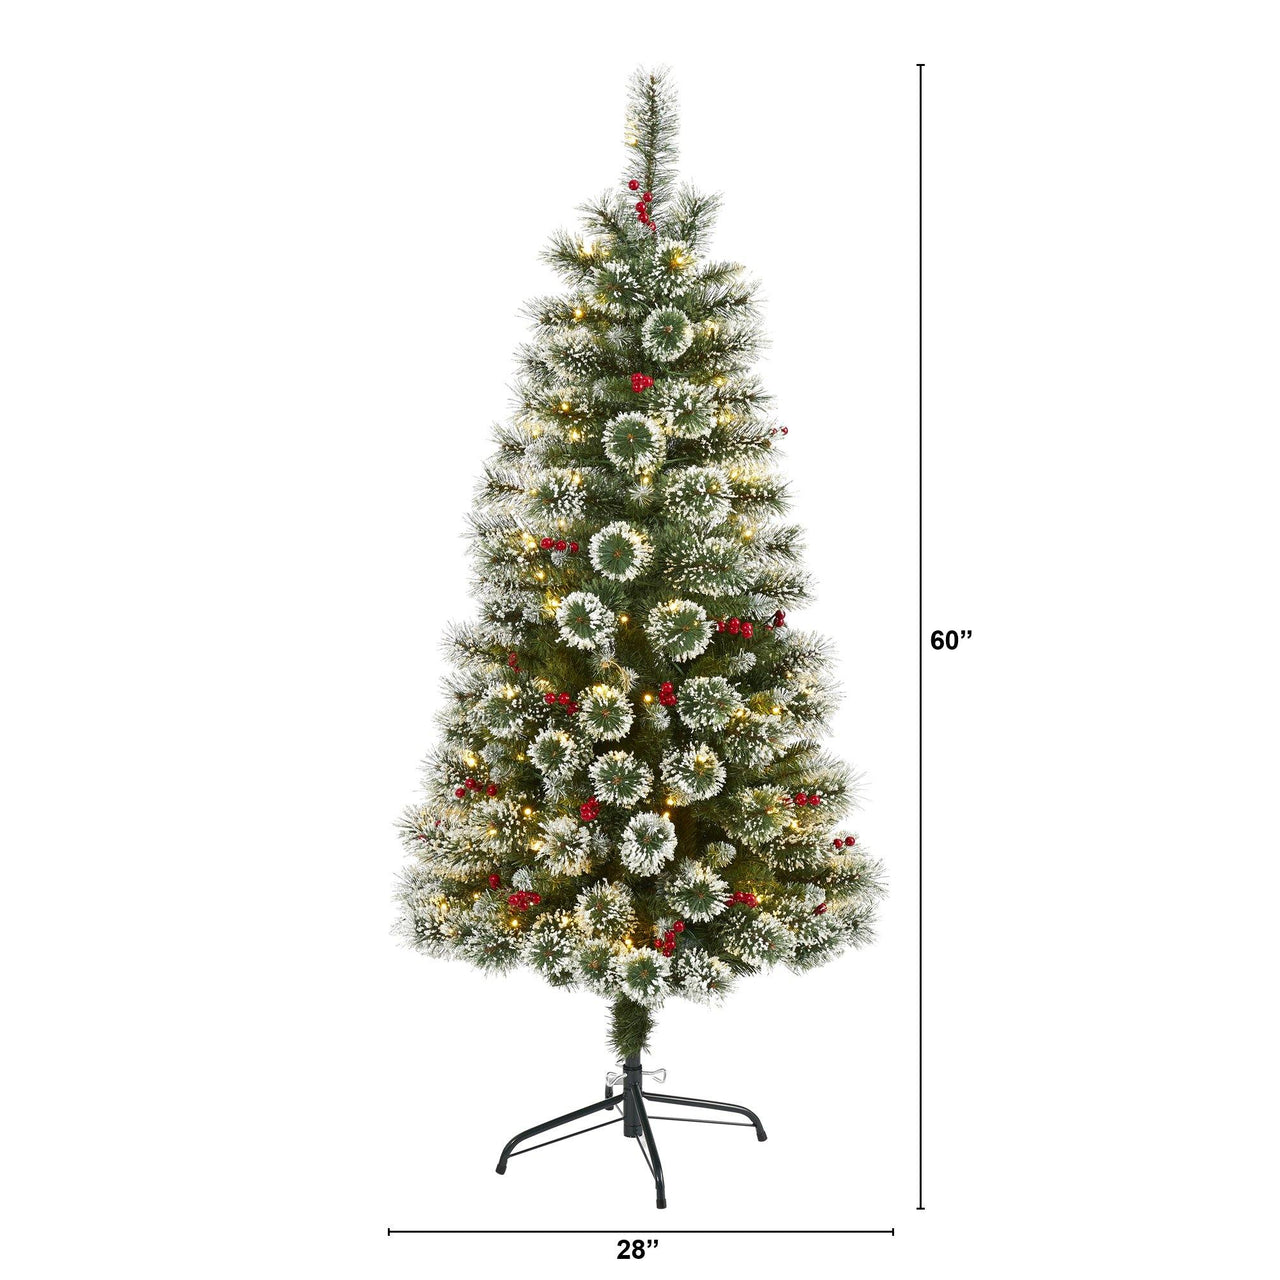 5’ Frosted Swiss Pine Artificial Christmas Tree with 200 Clear LED Lights and Berries - The Fox Decor